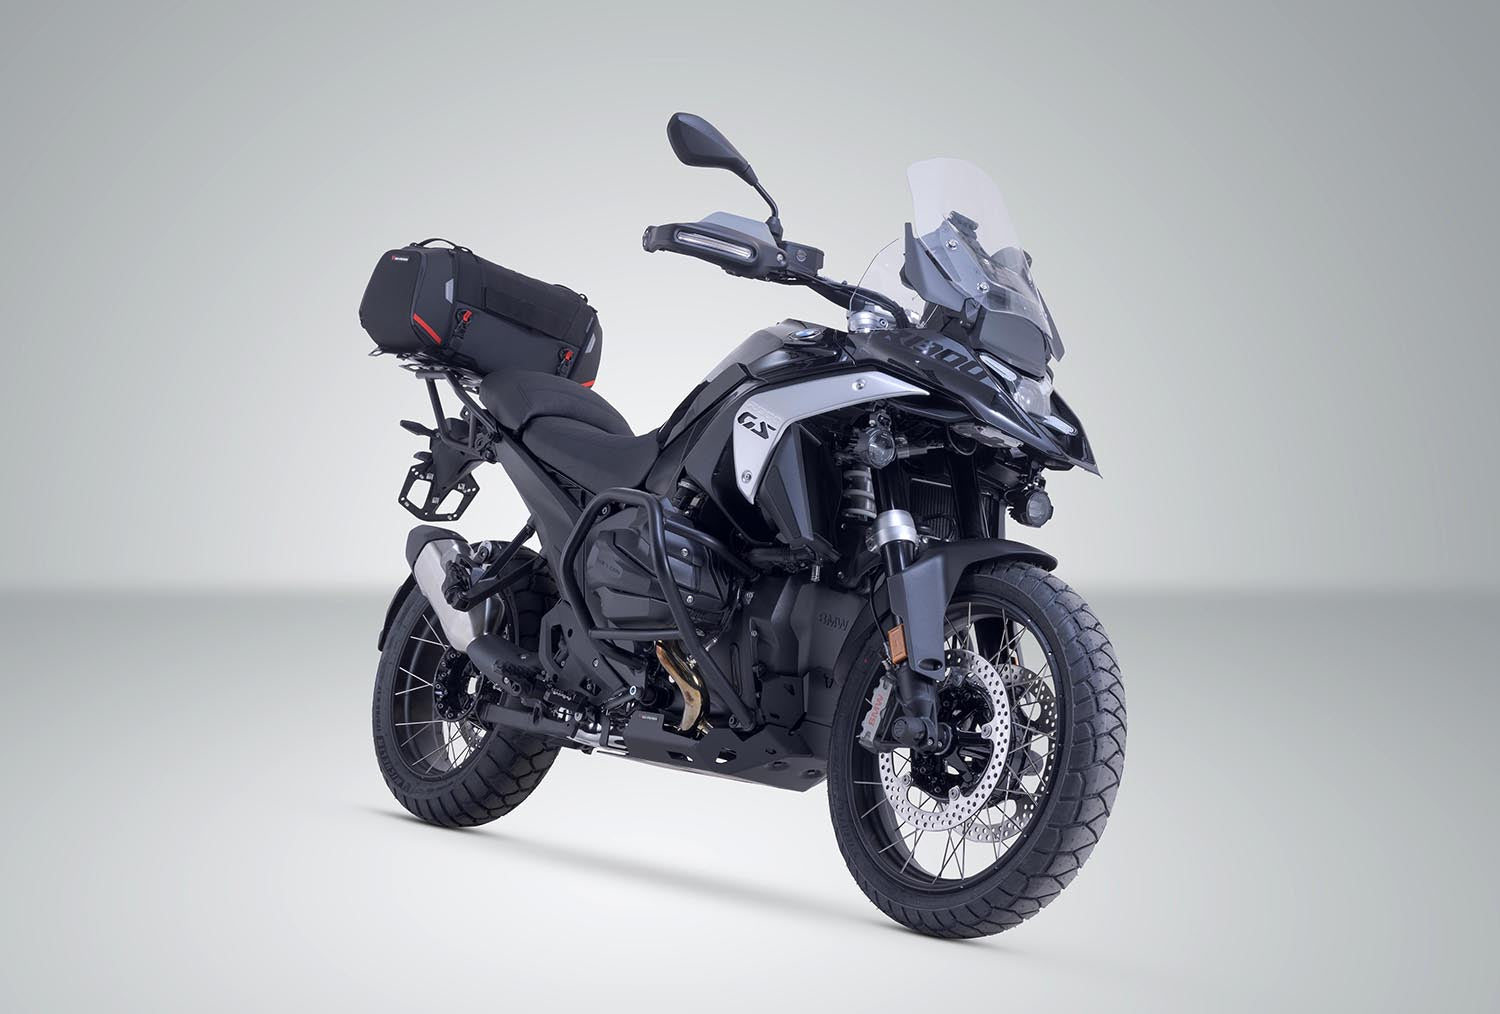 SW-MOTECH USA Offers Full Range of Accessories for the BMW R1300GS